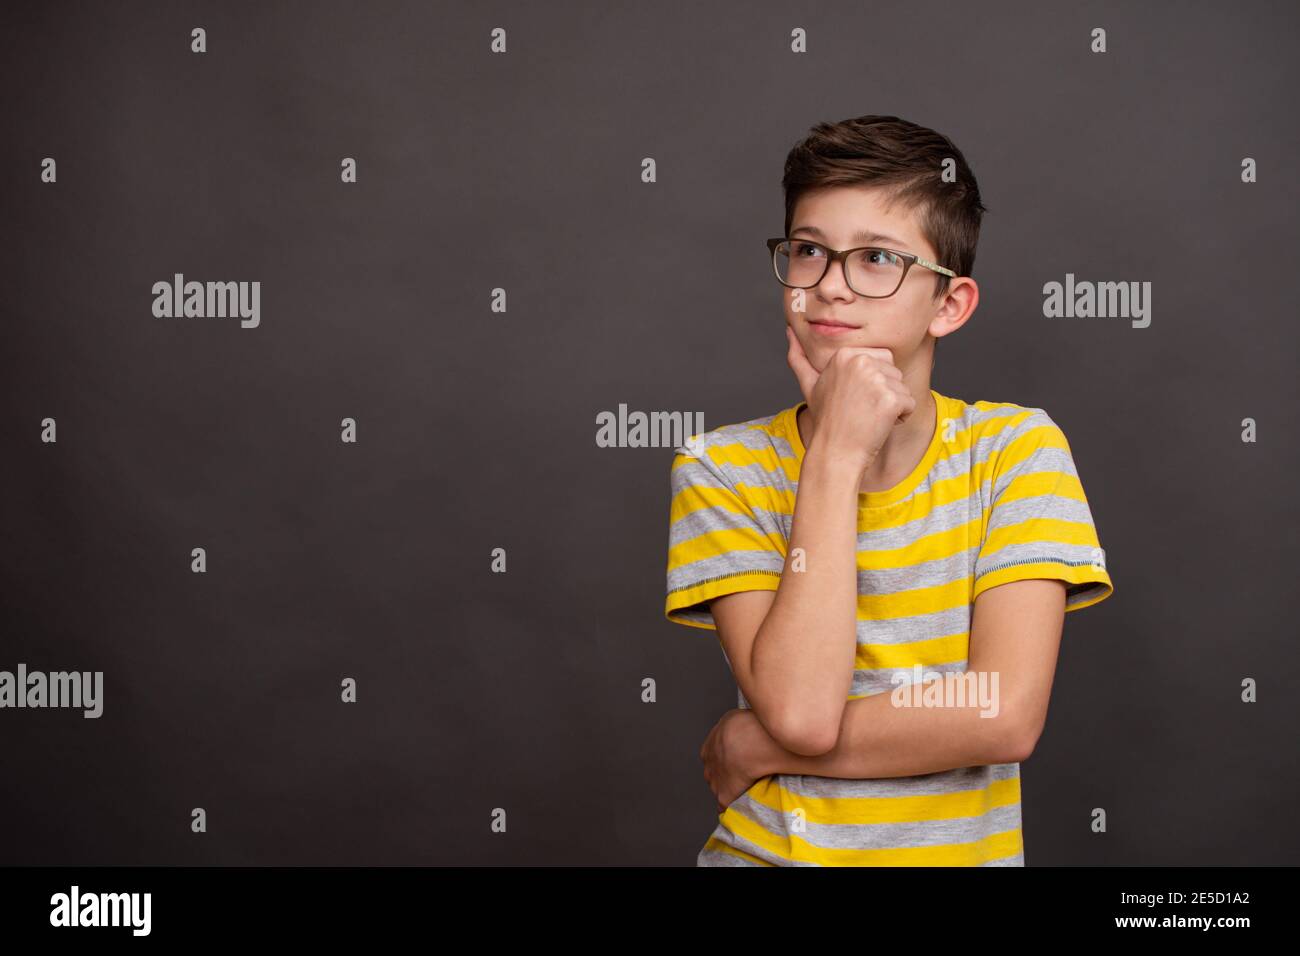 A teenage boy with glasses thought about it. Serious face expression.  Stock Photo